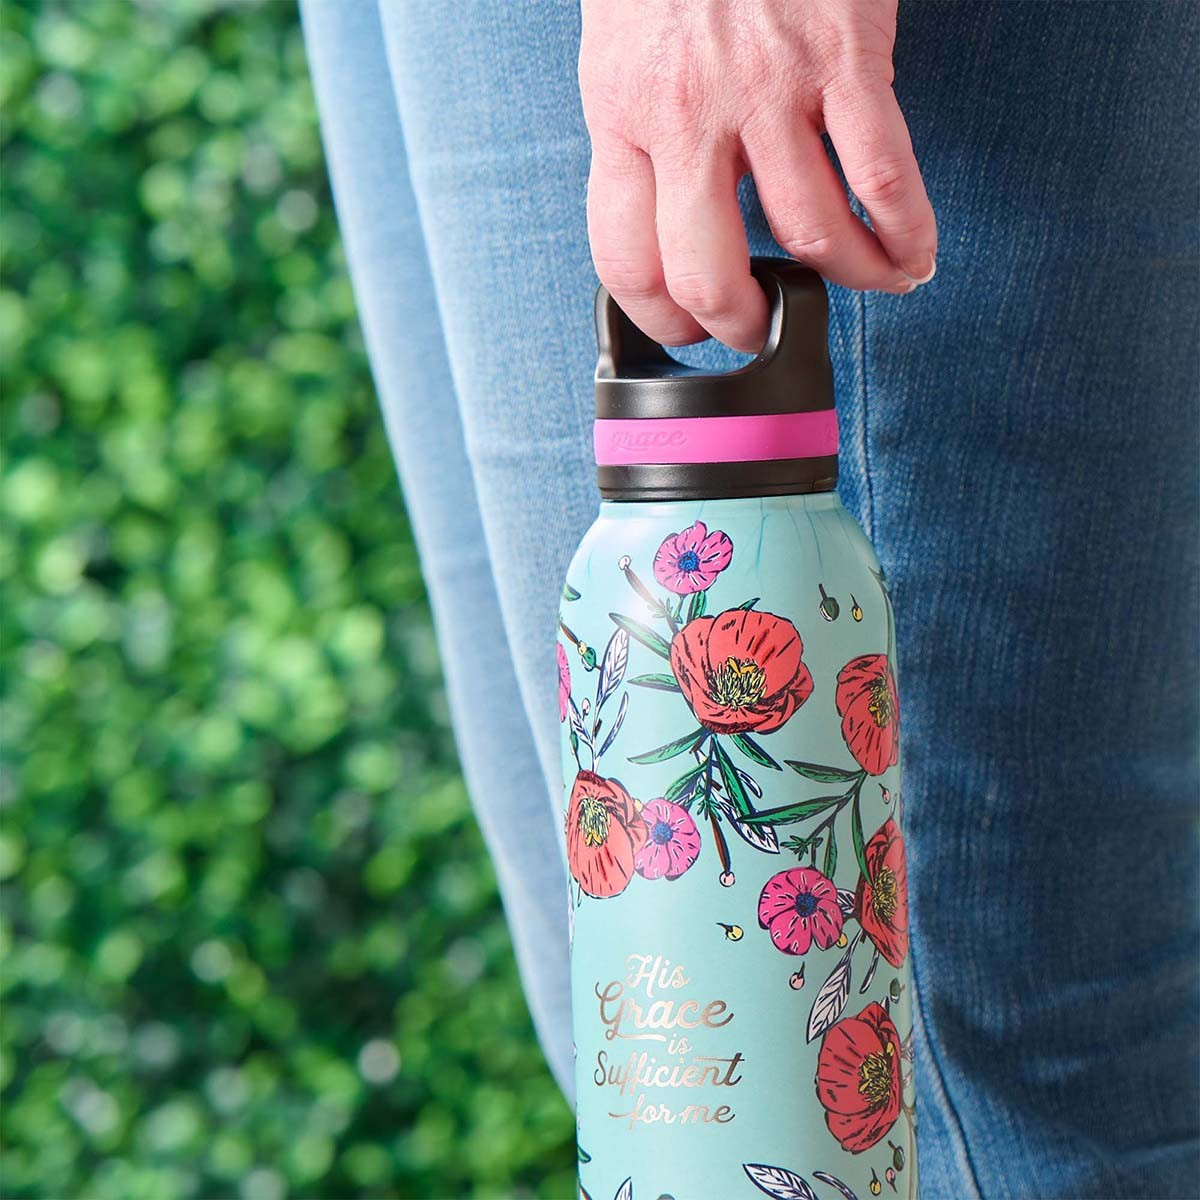 My Grace is Sufficient Glass Water Bottle with Bamboo Lid and Sleeve - 2  Corinthians 12:9